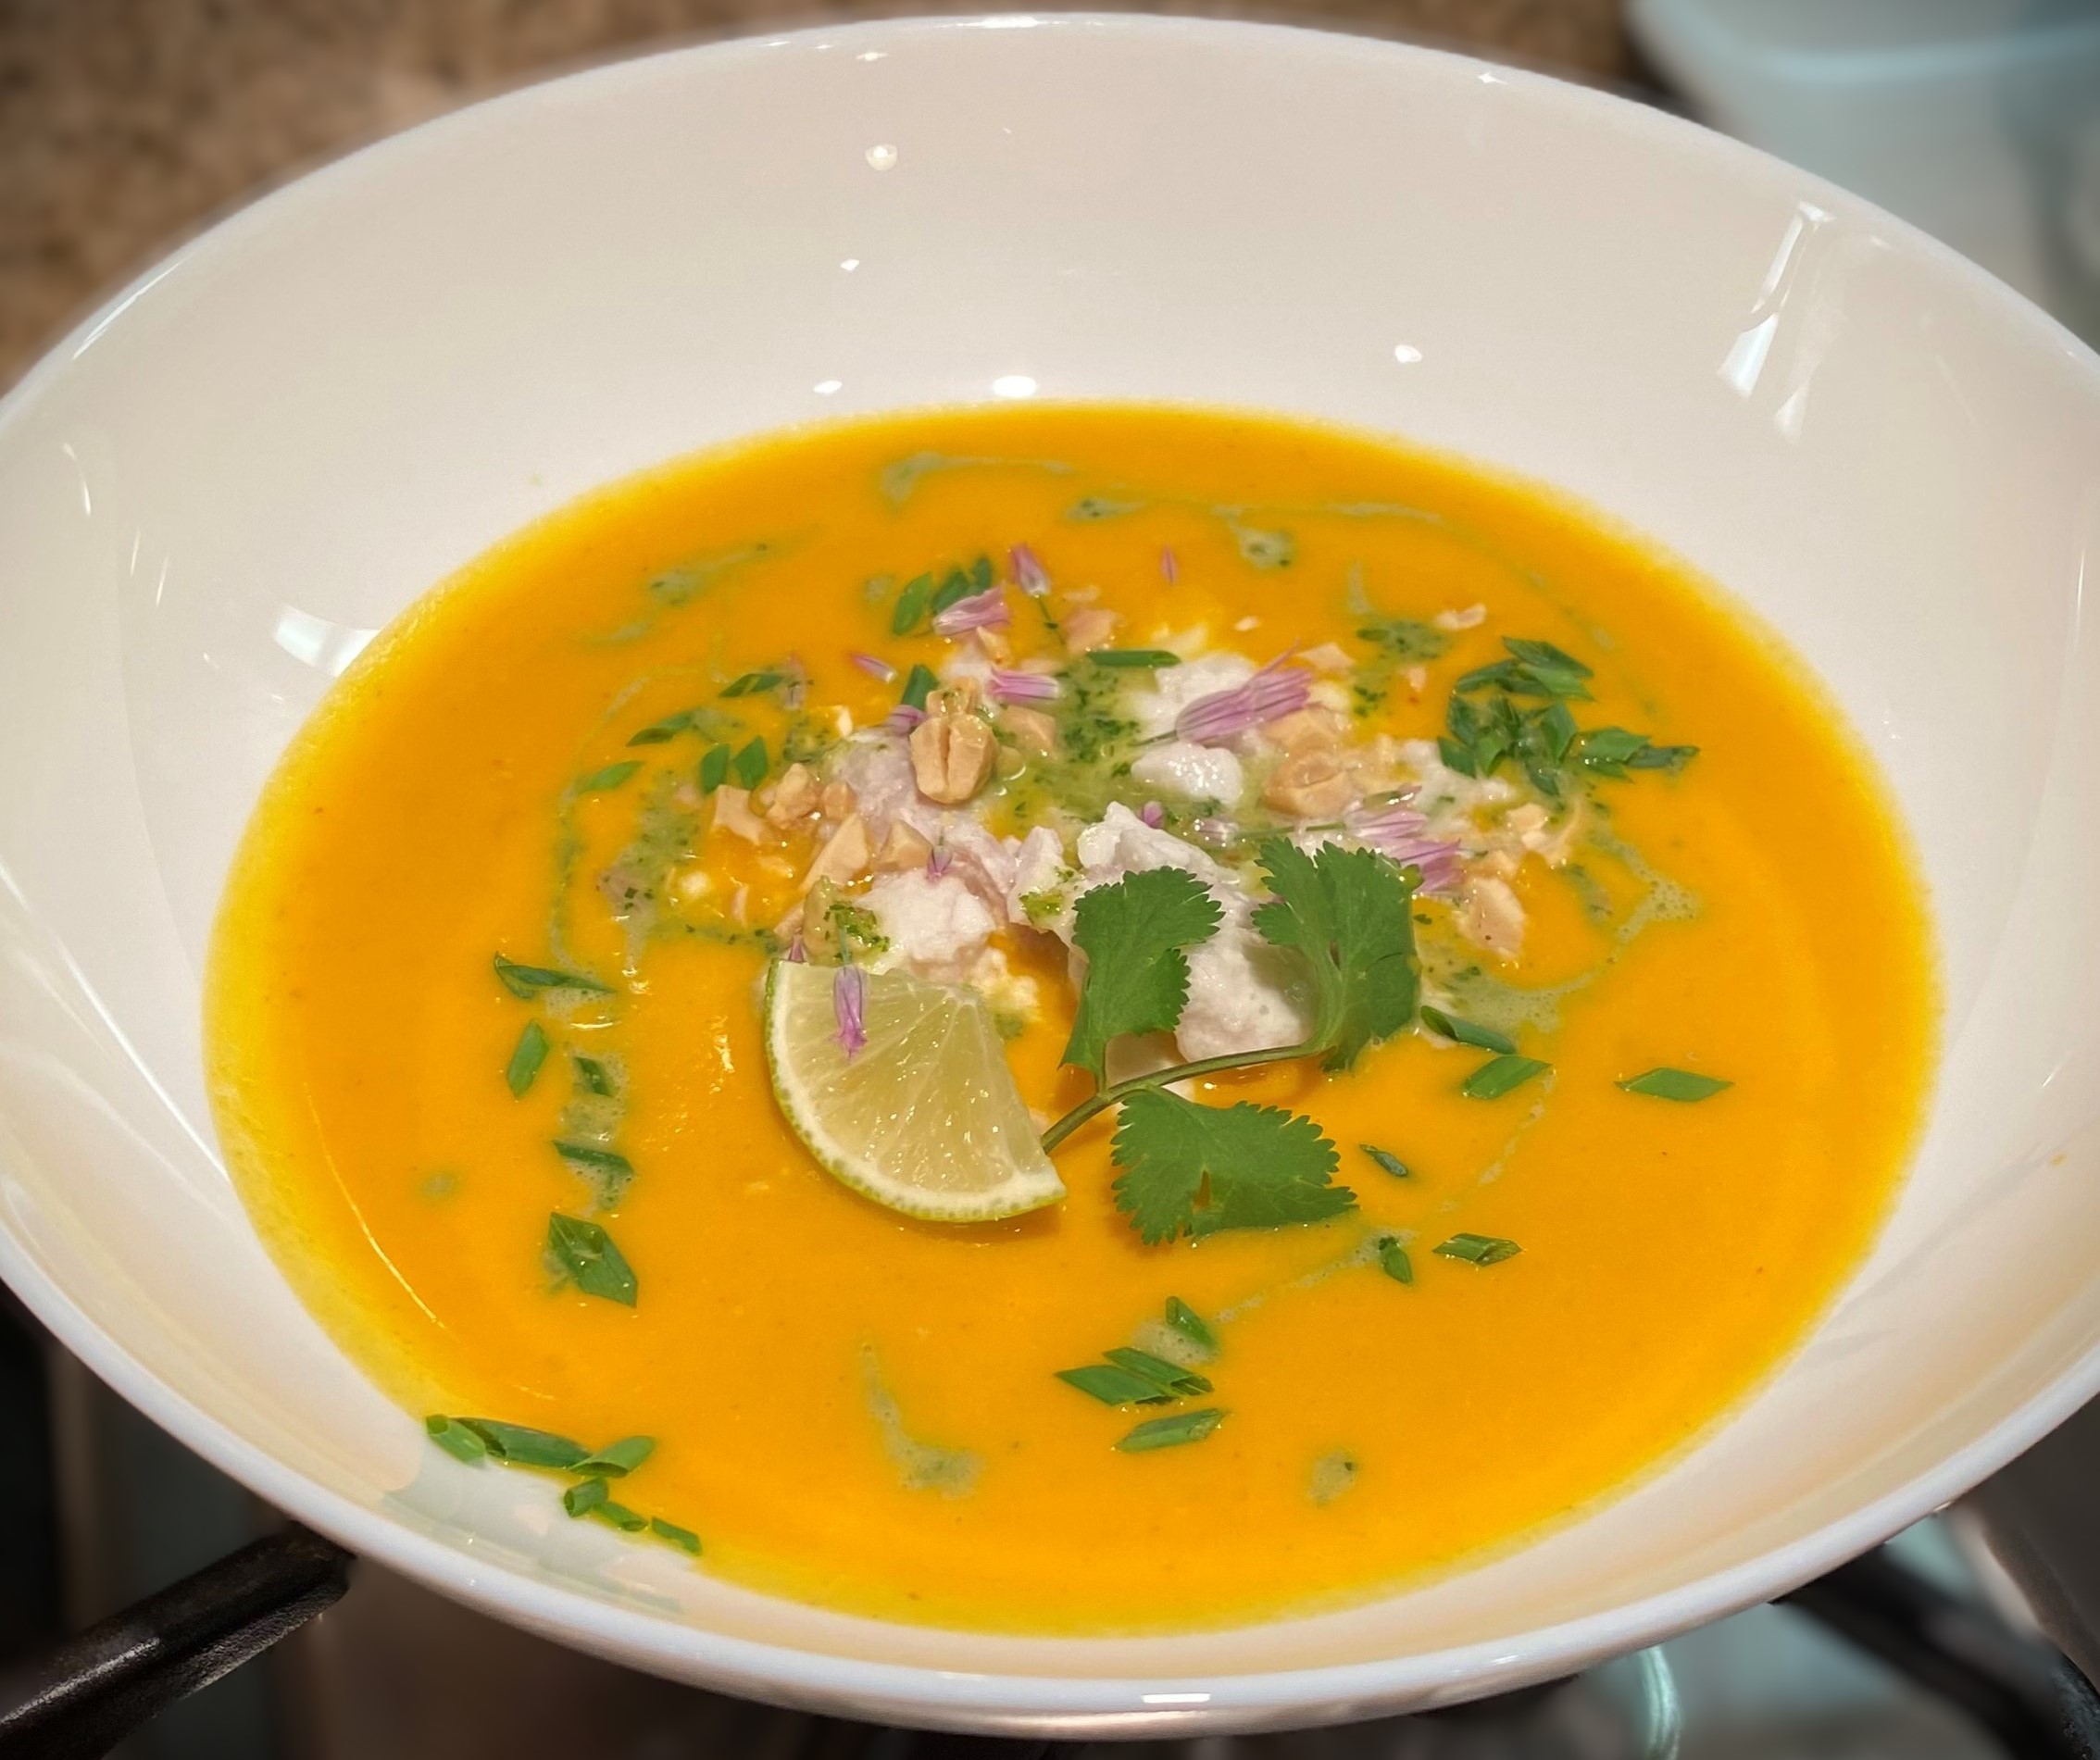 Carrot and Red Curry Soup with Rock Cod